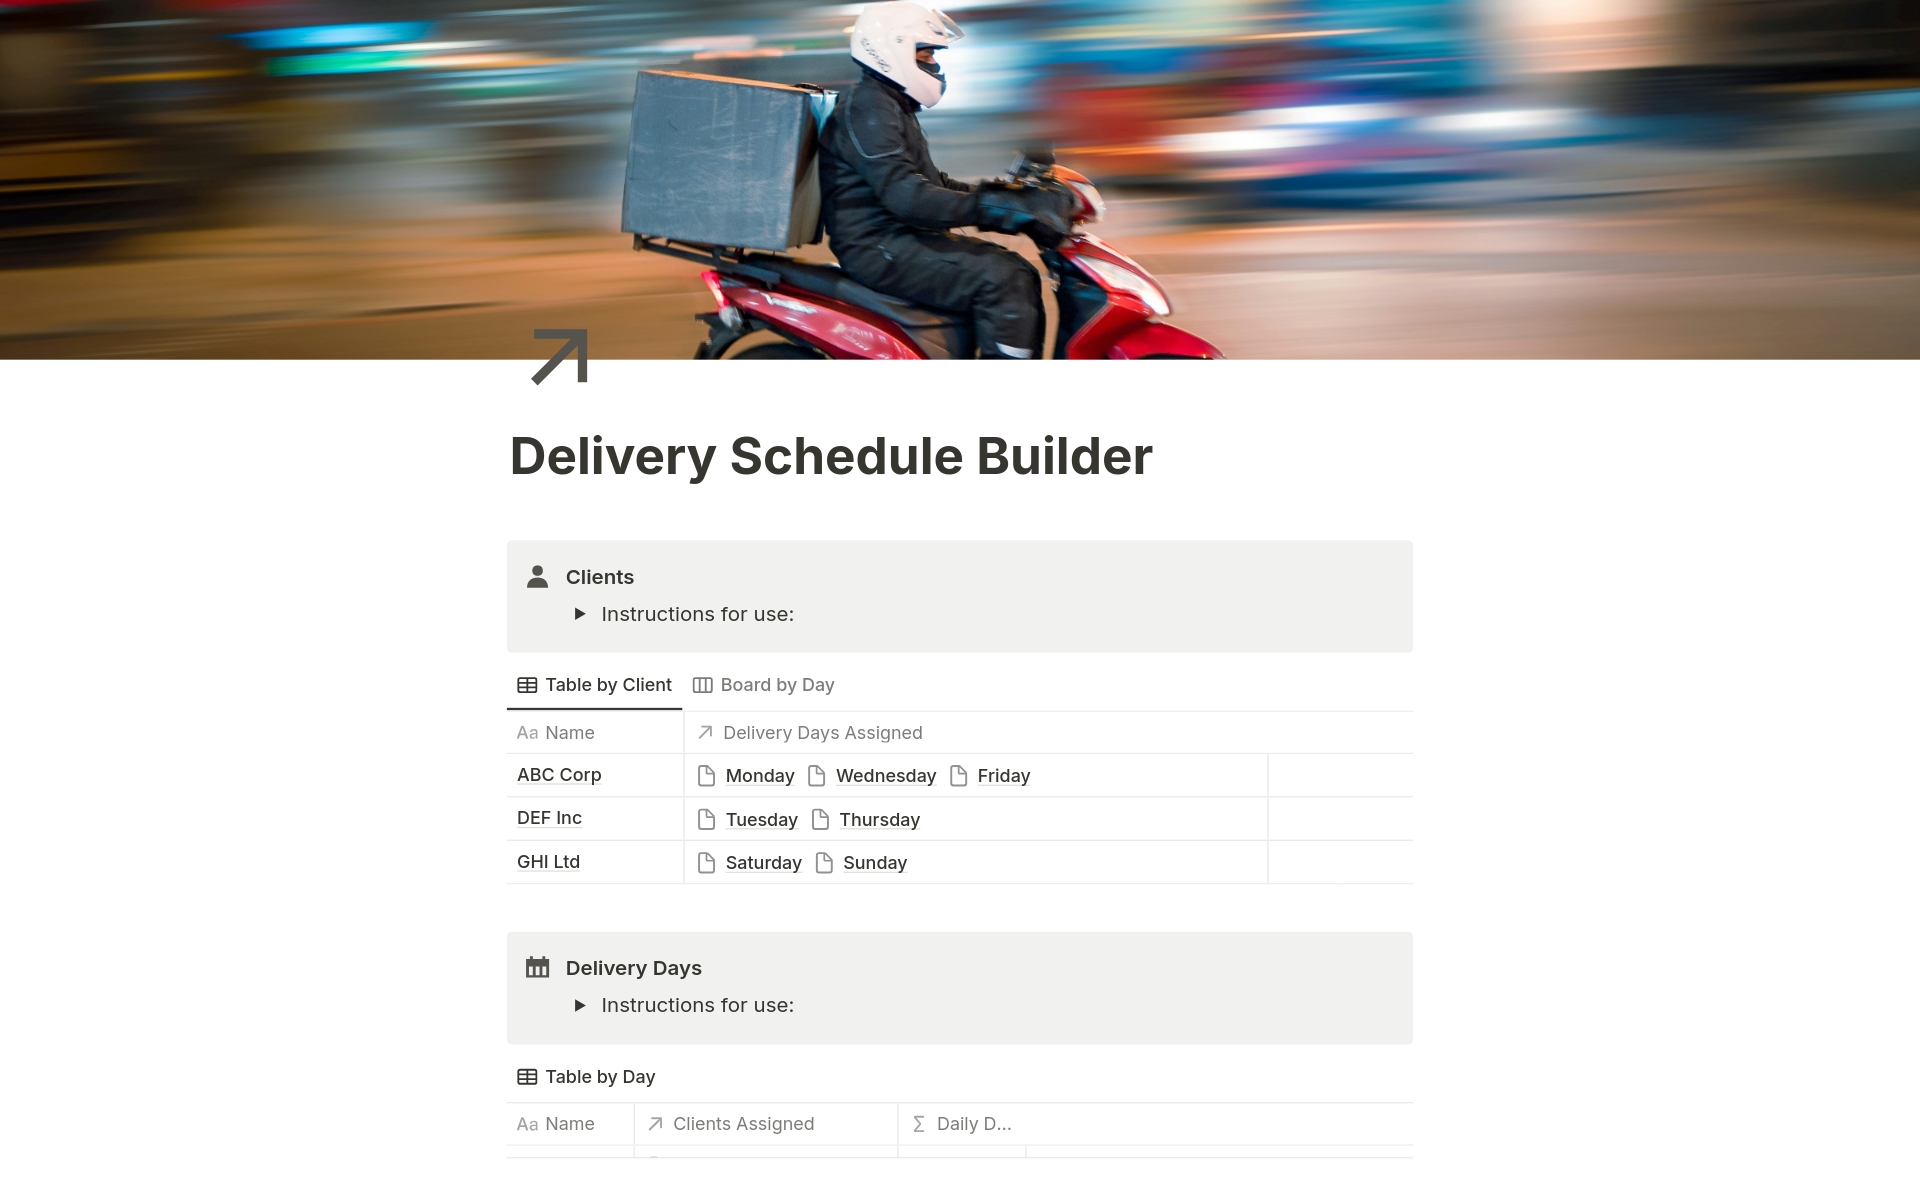 For subscription-based businesses, or any business that delivers products to clients on a weekly basis, this template allows you to create a dynamic calendar view schedule of deliveries.  